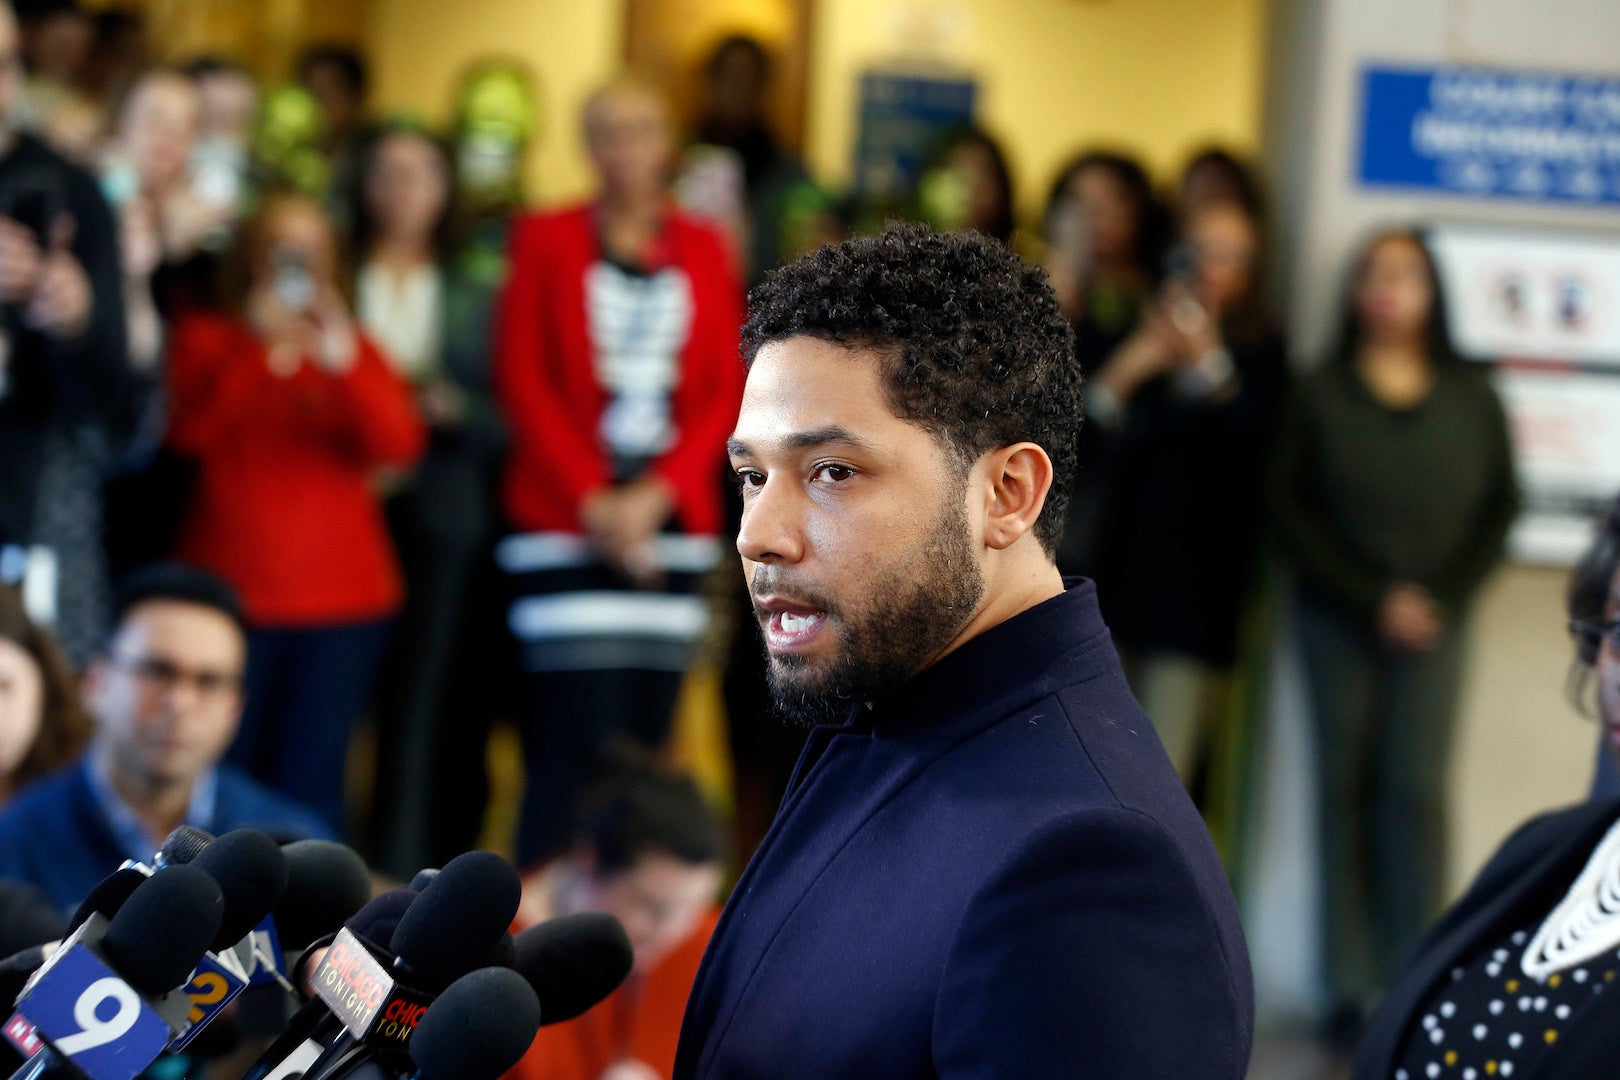 Jussie Smollett Petitions Court To Overturn Conviction For Staging 2019 Hate Crime